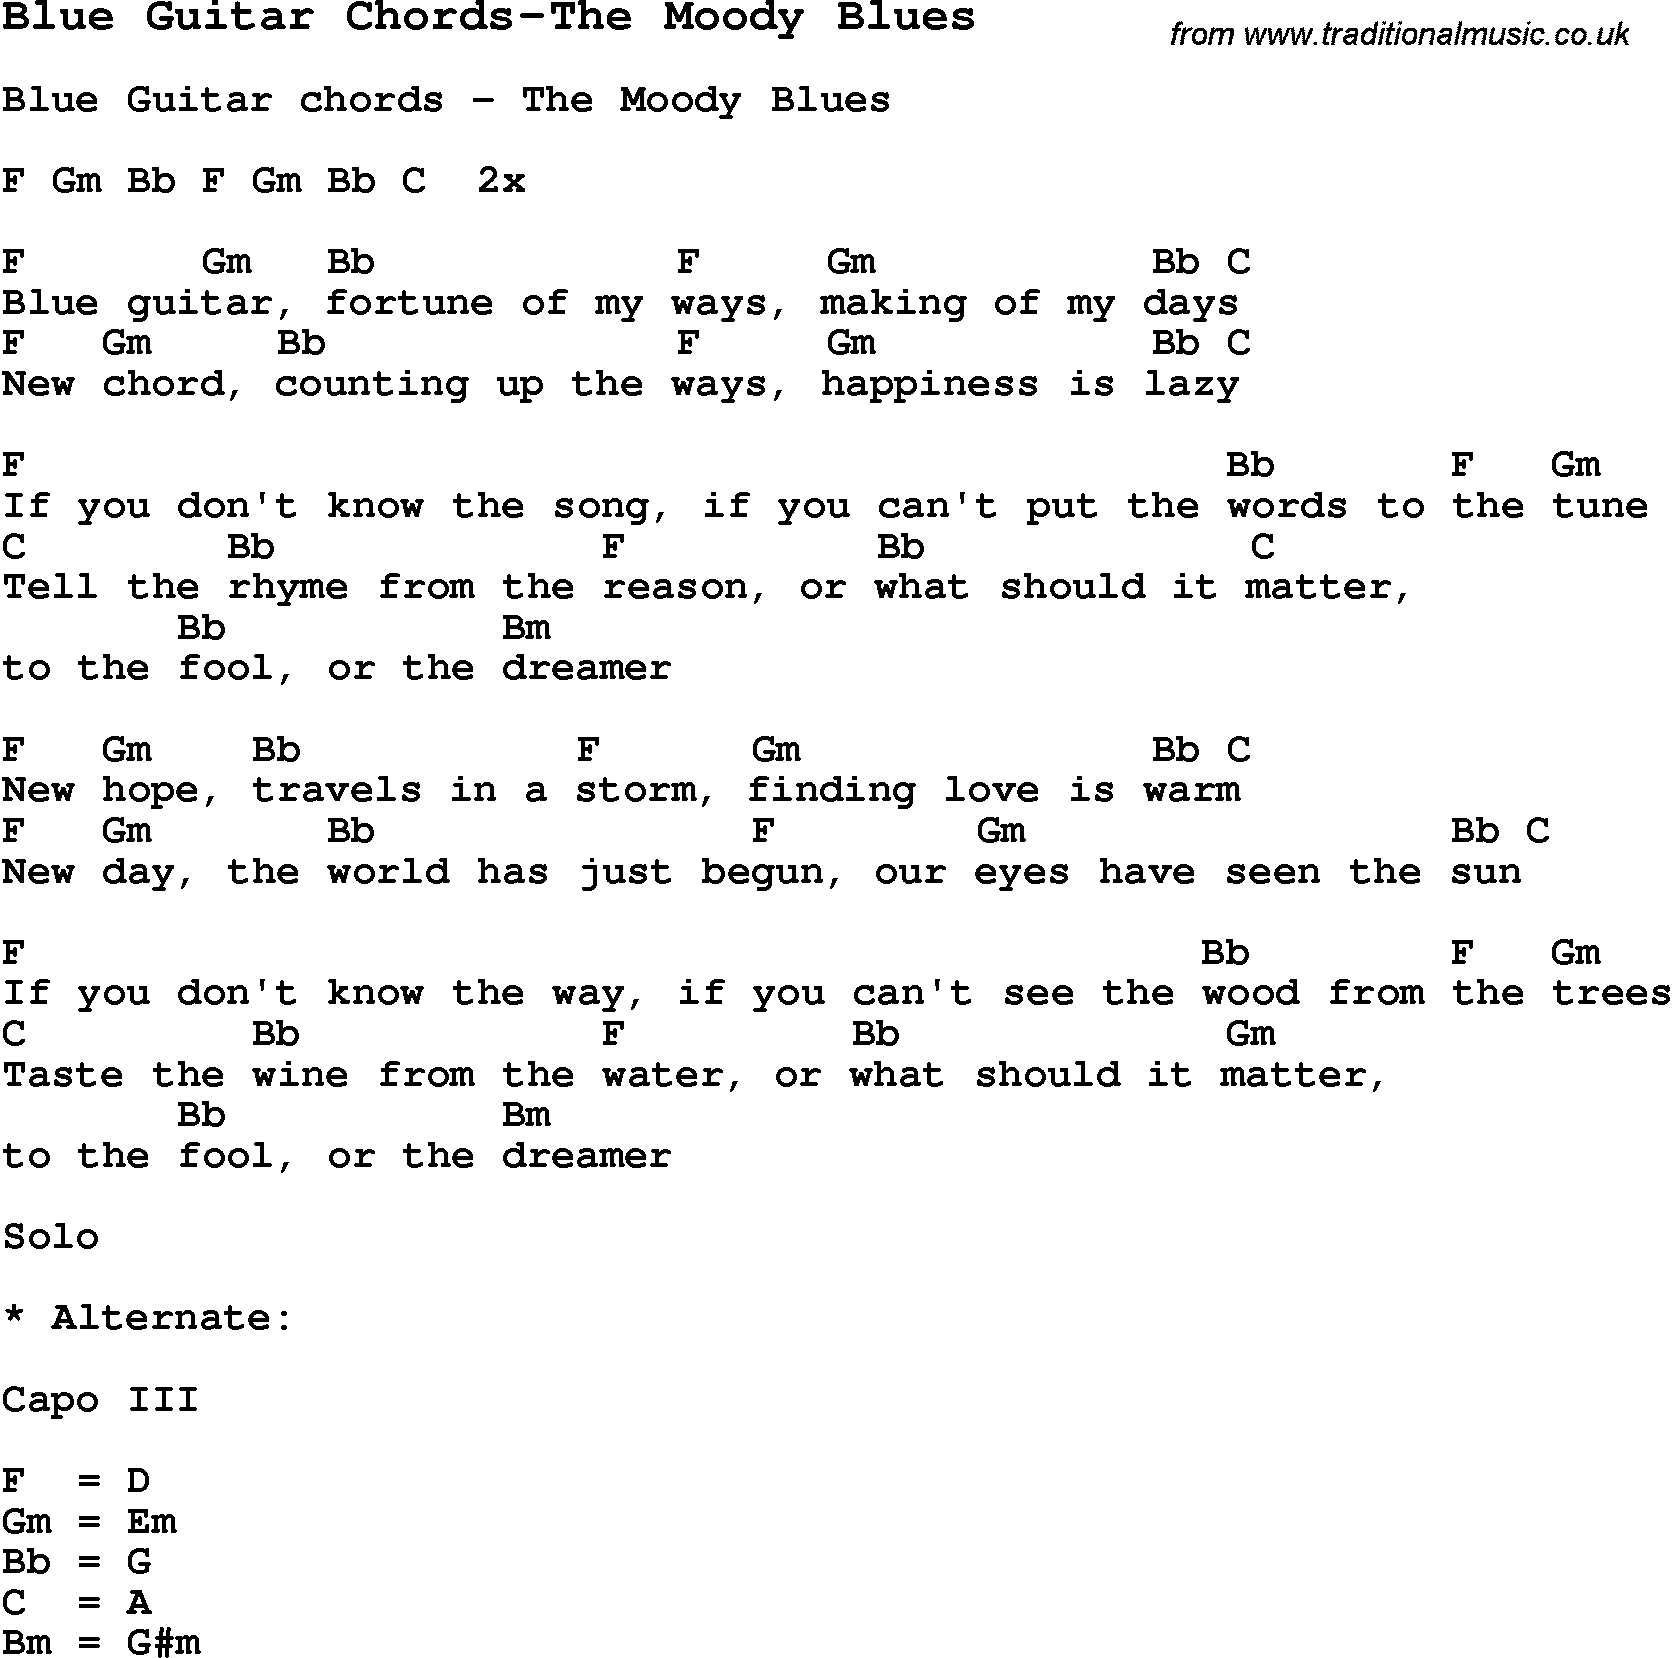 Blues Guitar Song, lyrics, chords, tablature, playing hints for Blue Guitar Chords-The Moody Blues